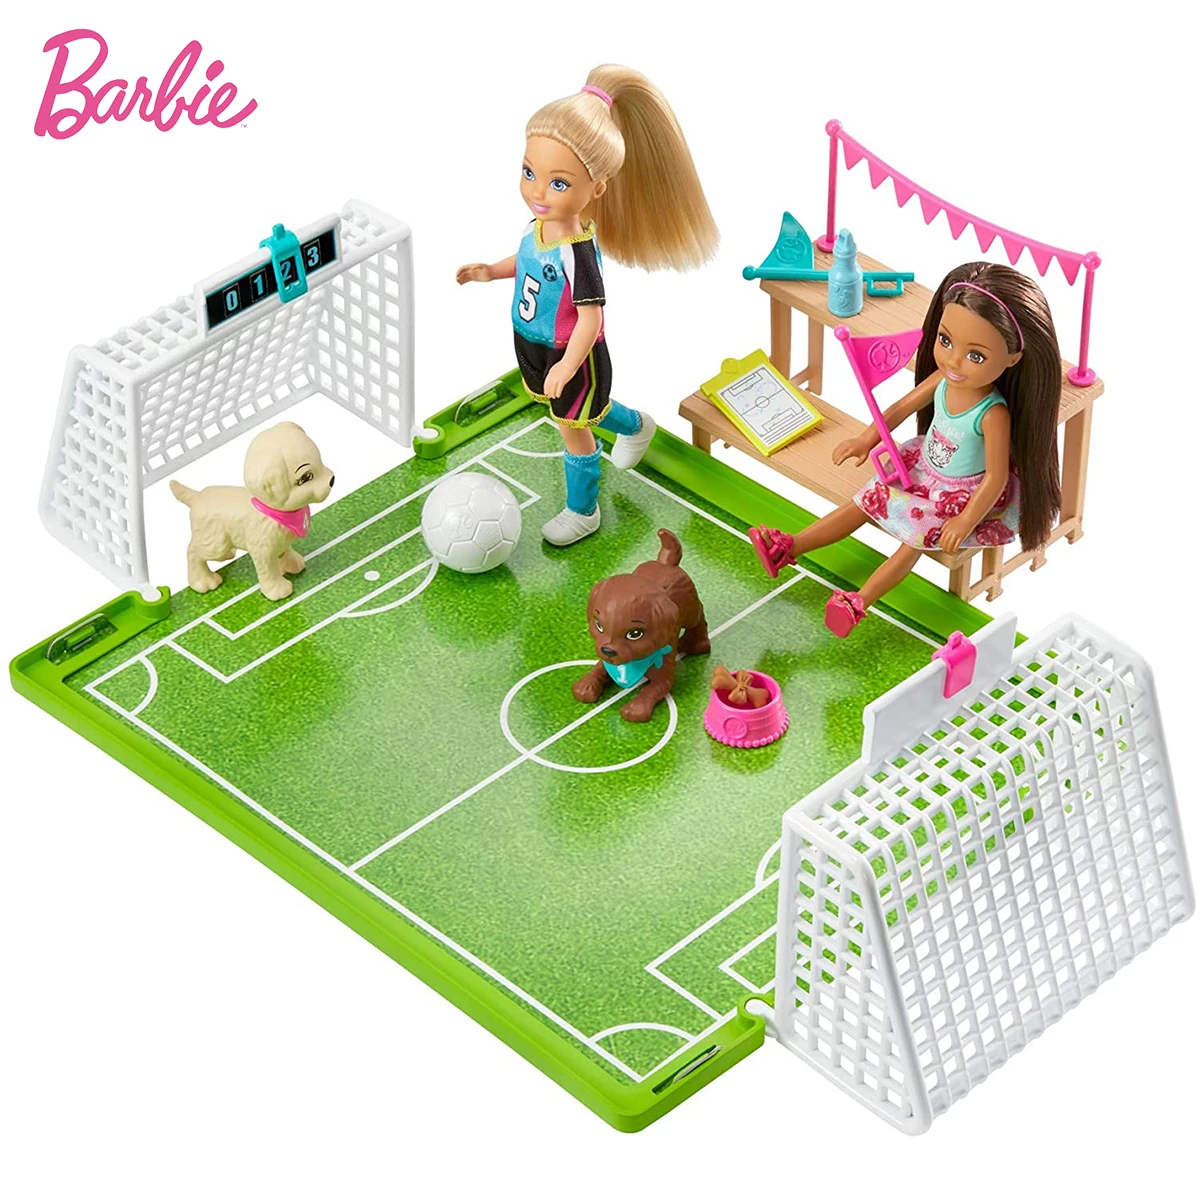 

Barbie Dreamhouse Adventures 6-inch Chelsea Doll with Soccer Playset and Accessories Toys for Kids Girls Birthday Gift GHK37